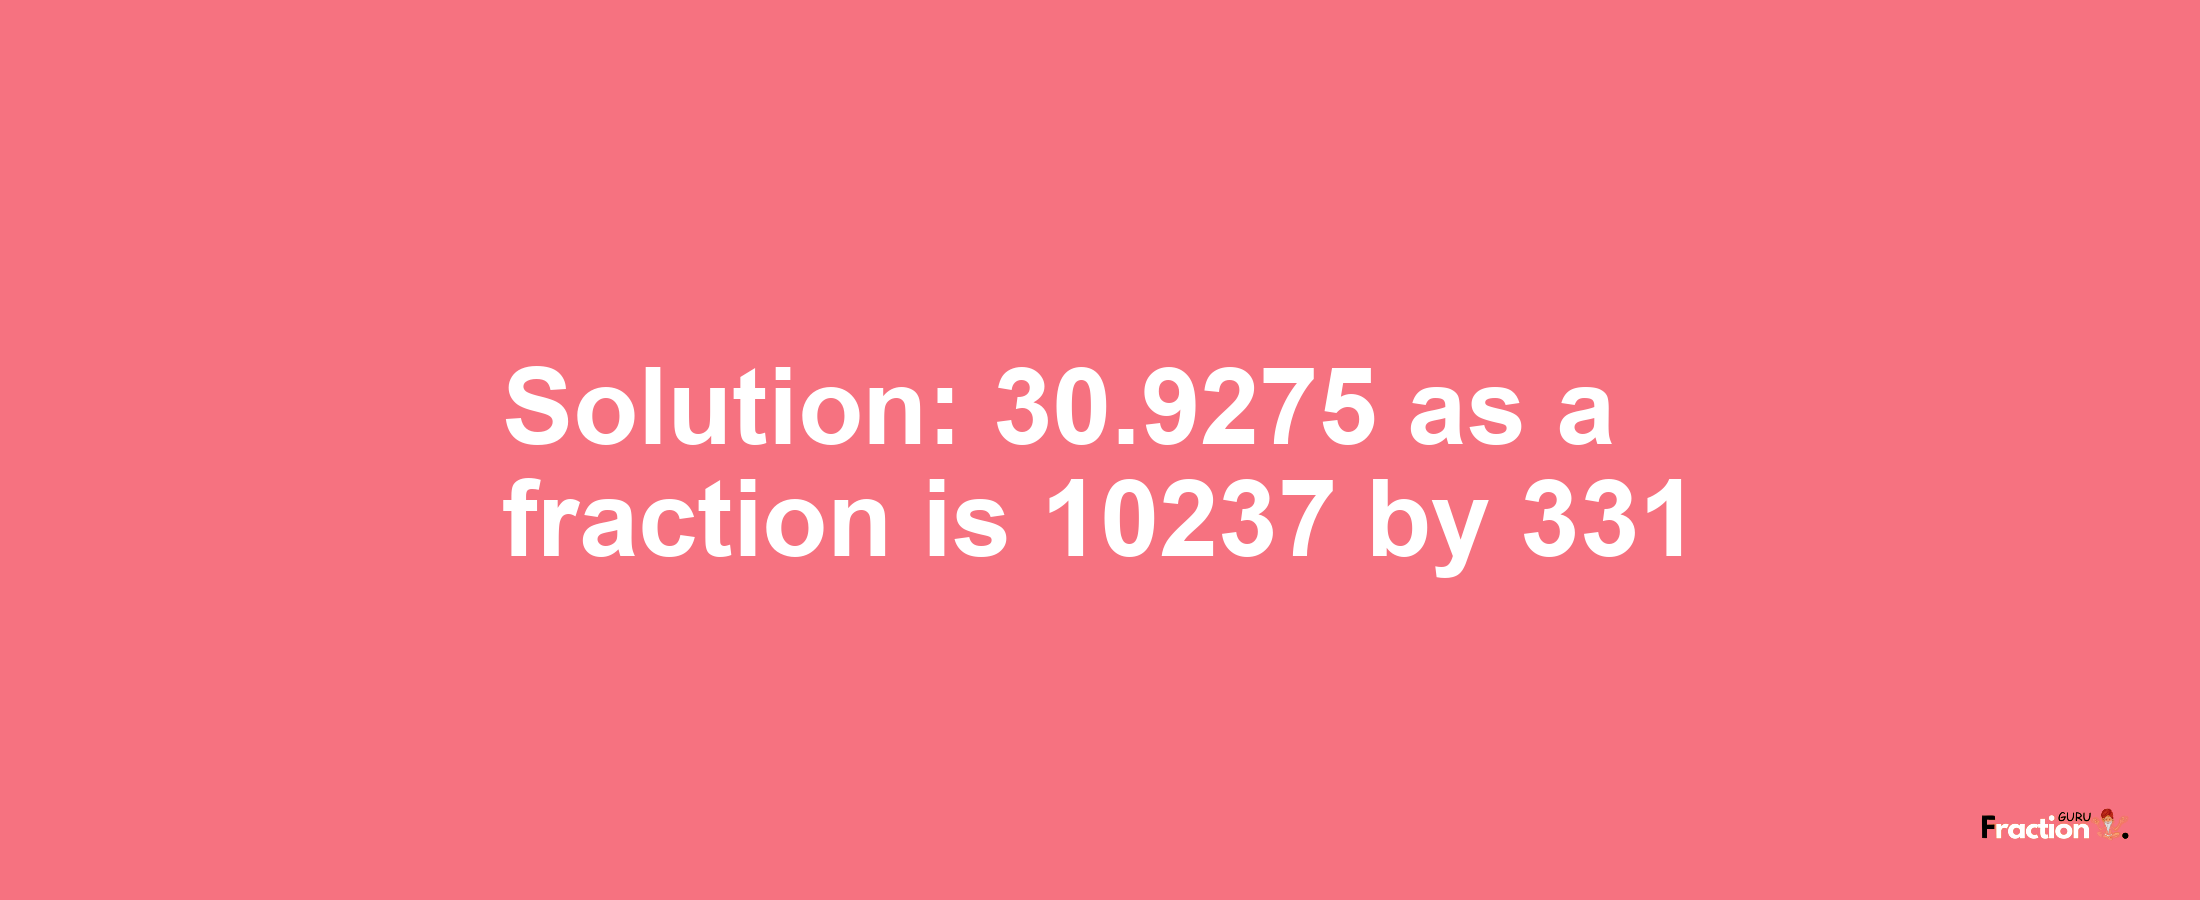 Solution:30.9275 as a fraction is 10237/331